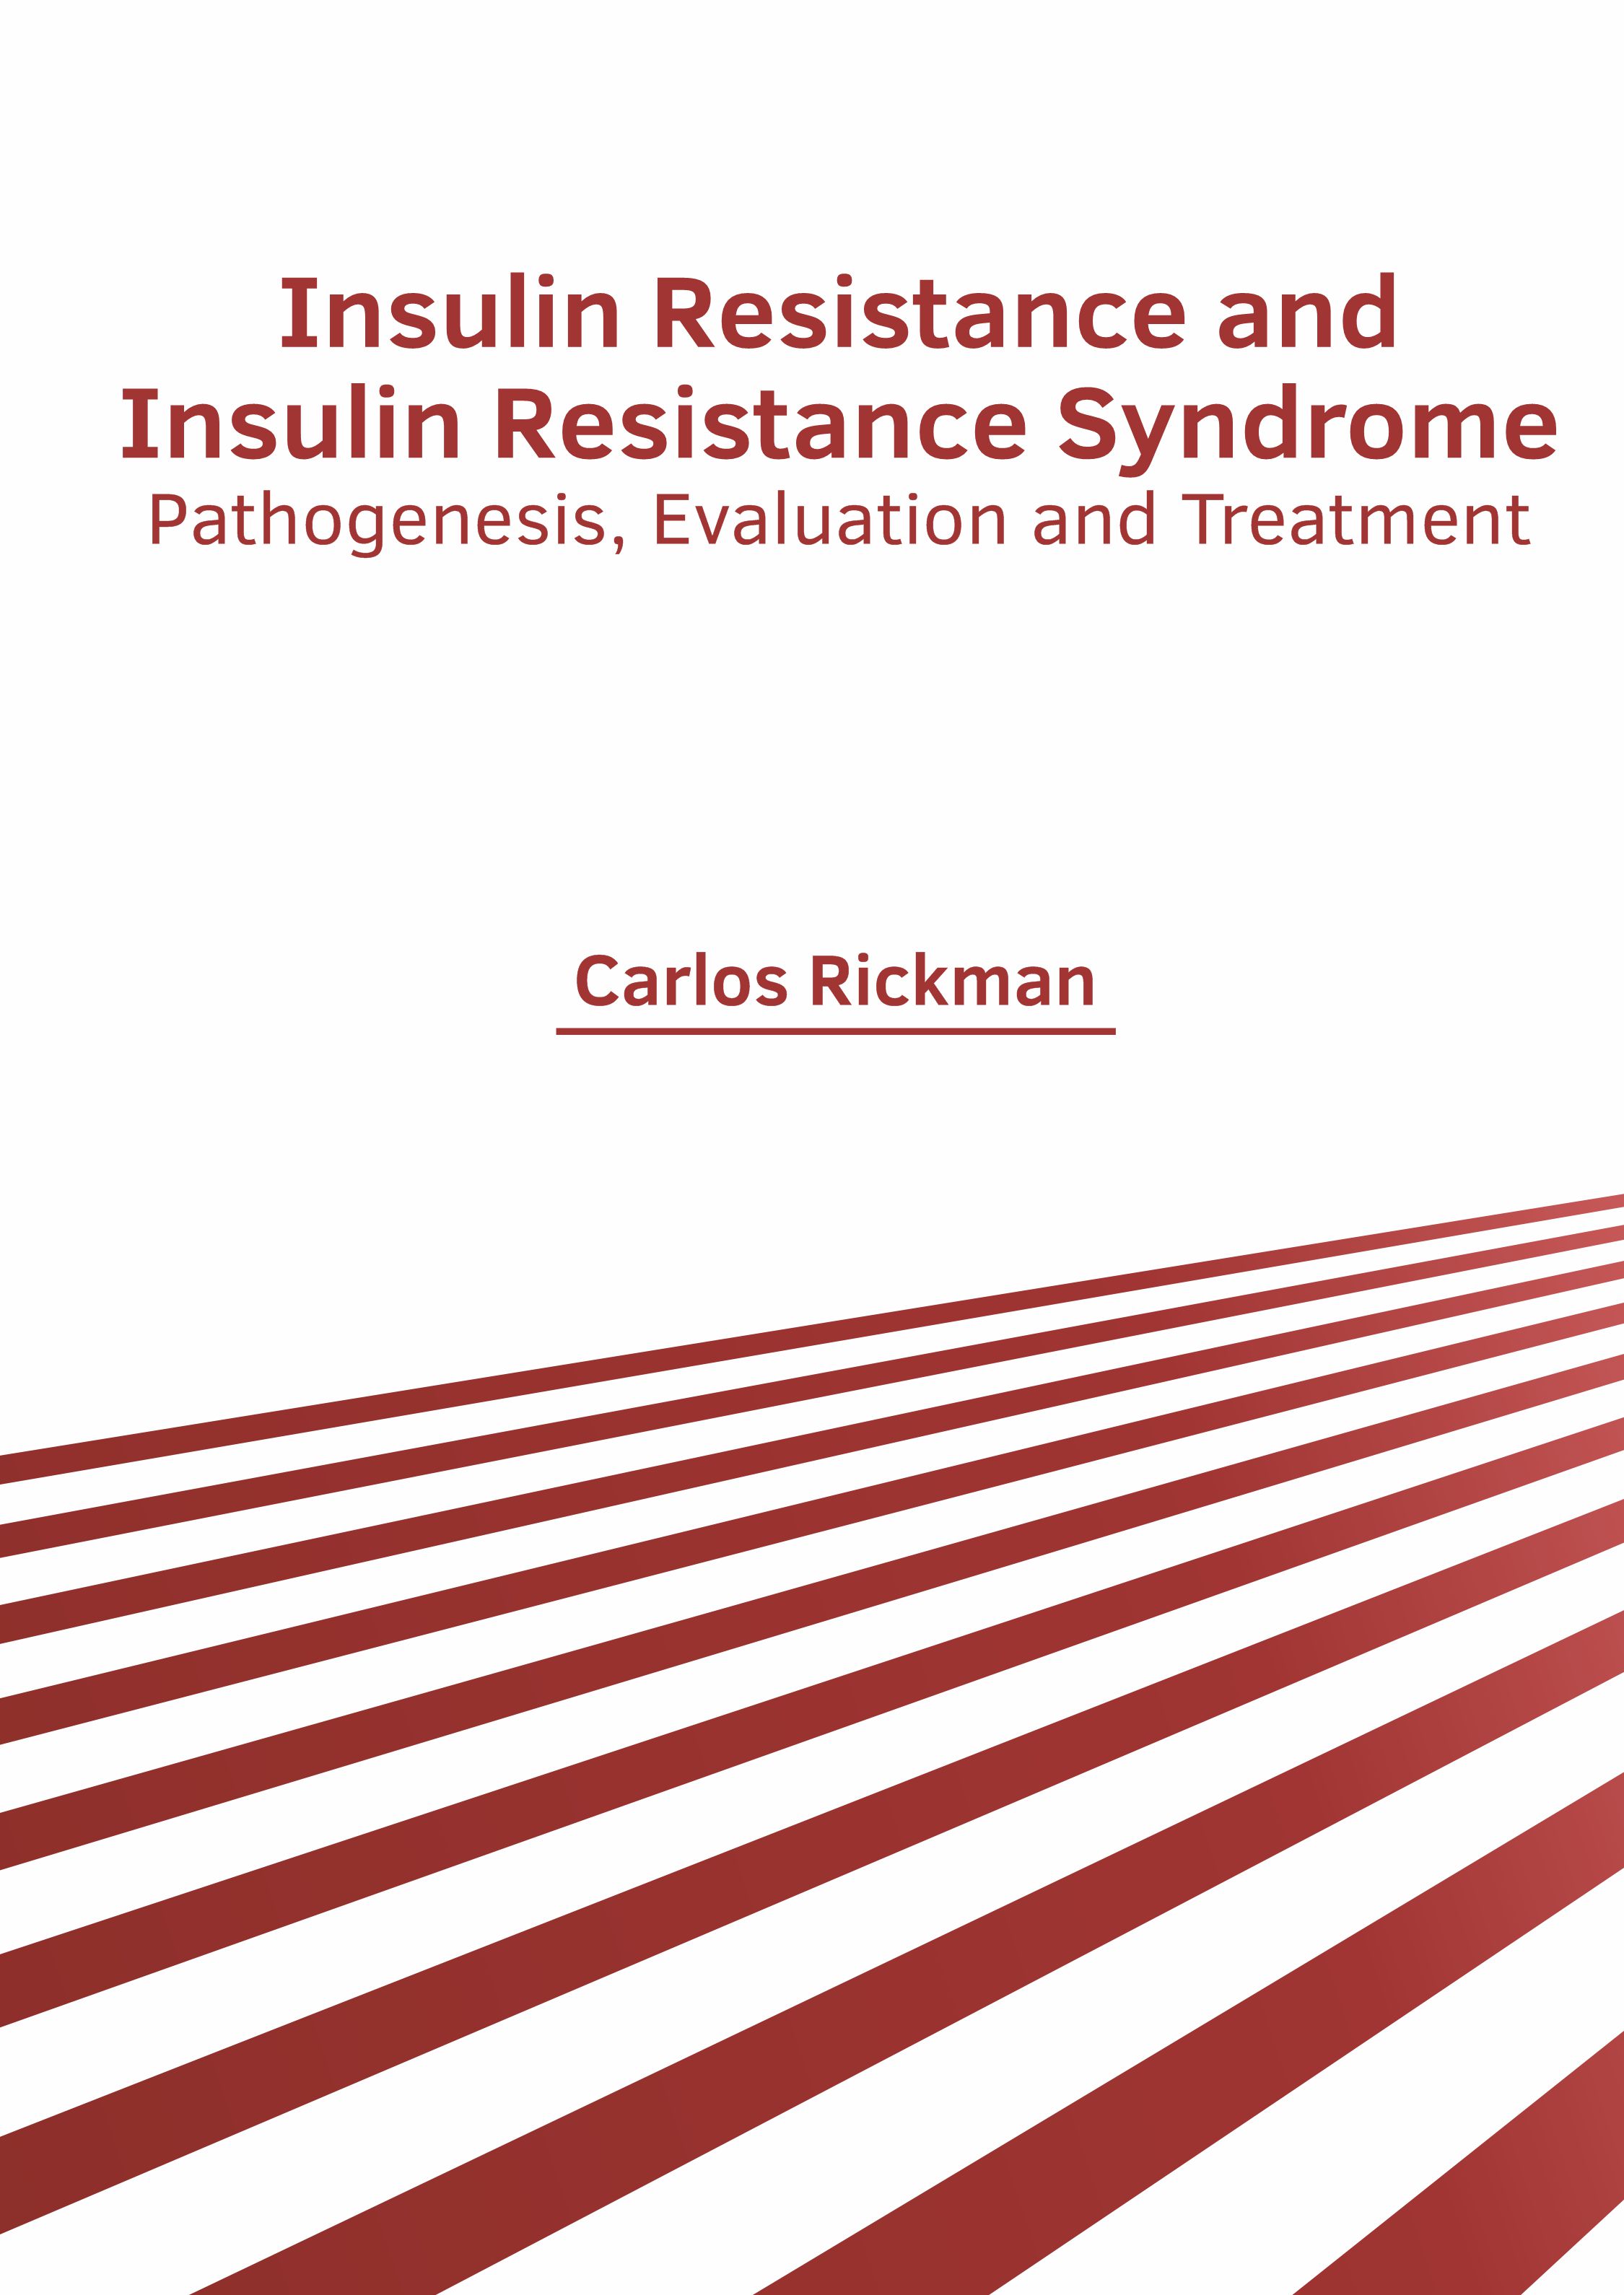 

exclusive-publishers/american-medical-publishers/insulin-resistance-and-insulin-resistance-syndrome-pathogenesis-evaluation-and-treatment-9781639271214